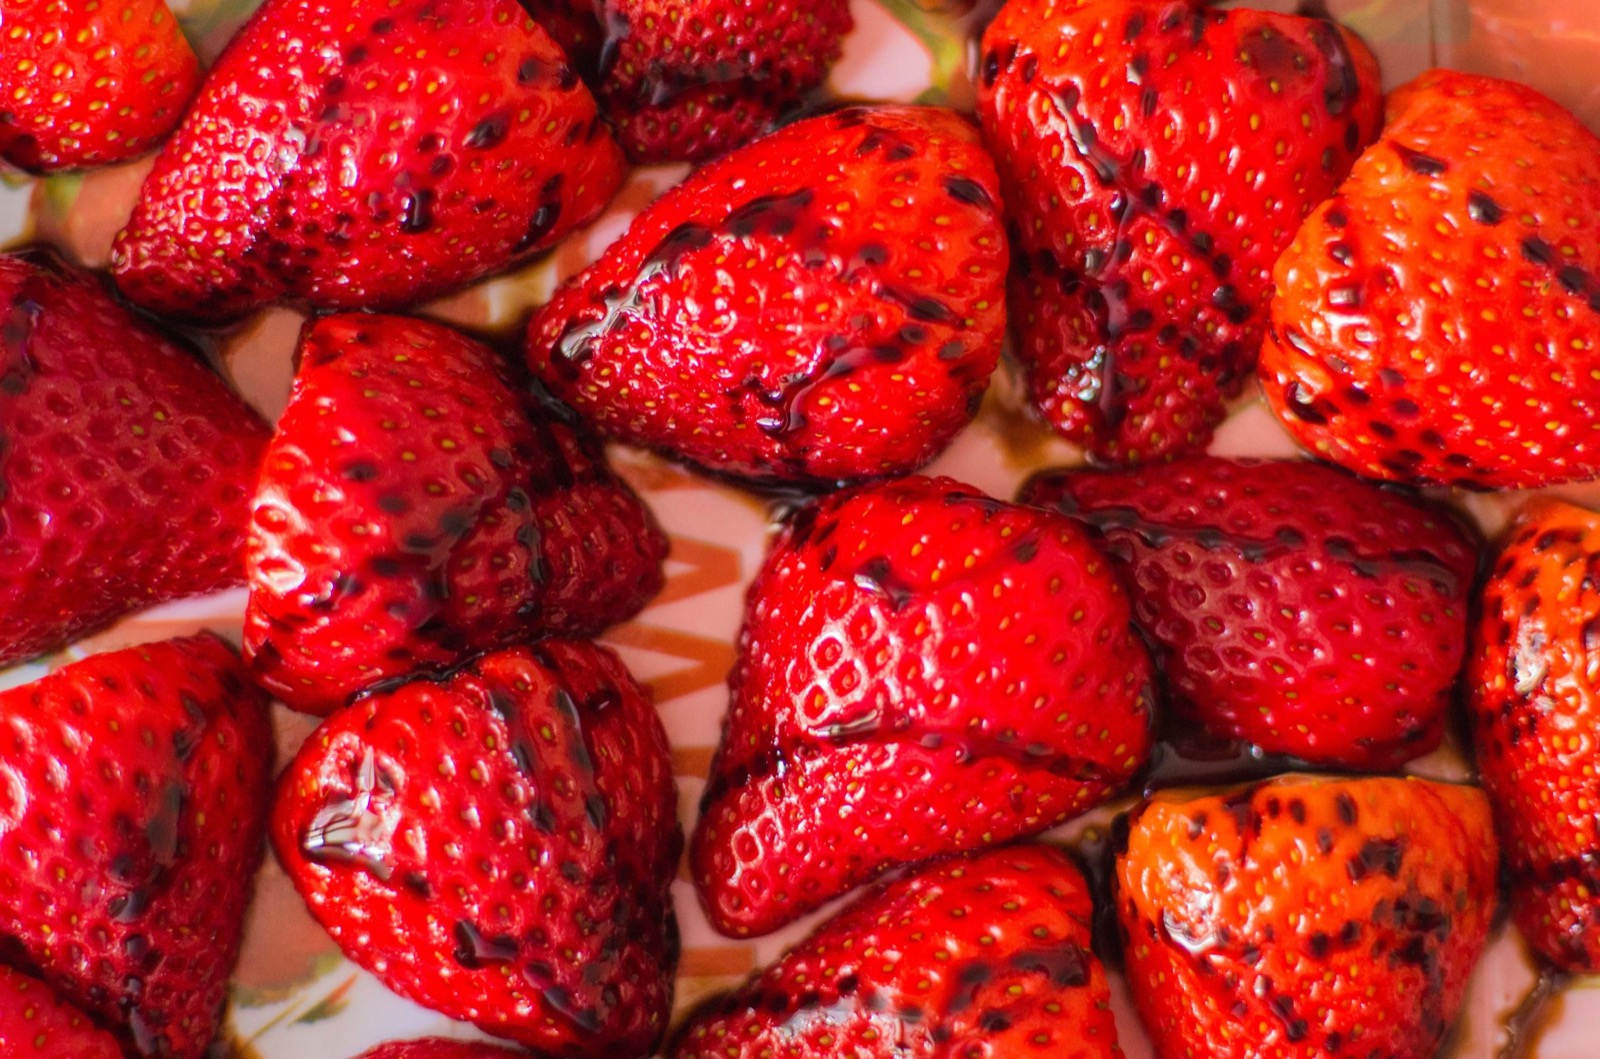 Say “Yum” Or “Yuck” to These Food Pairings to Find Out If You Are More Creative or Logical Strawberries with balsamic vinegar